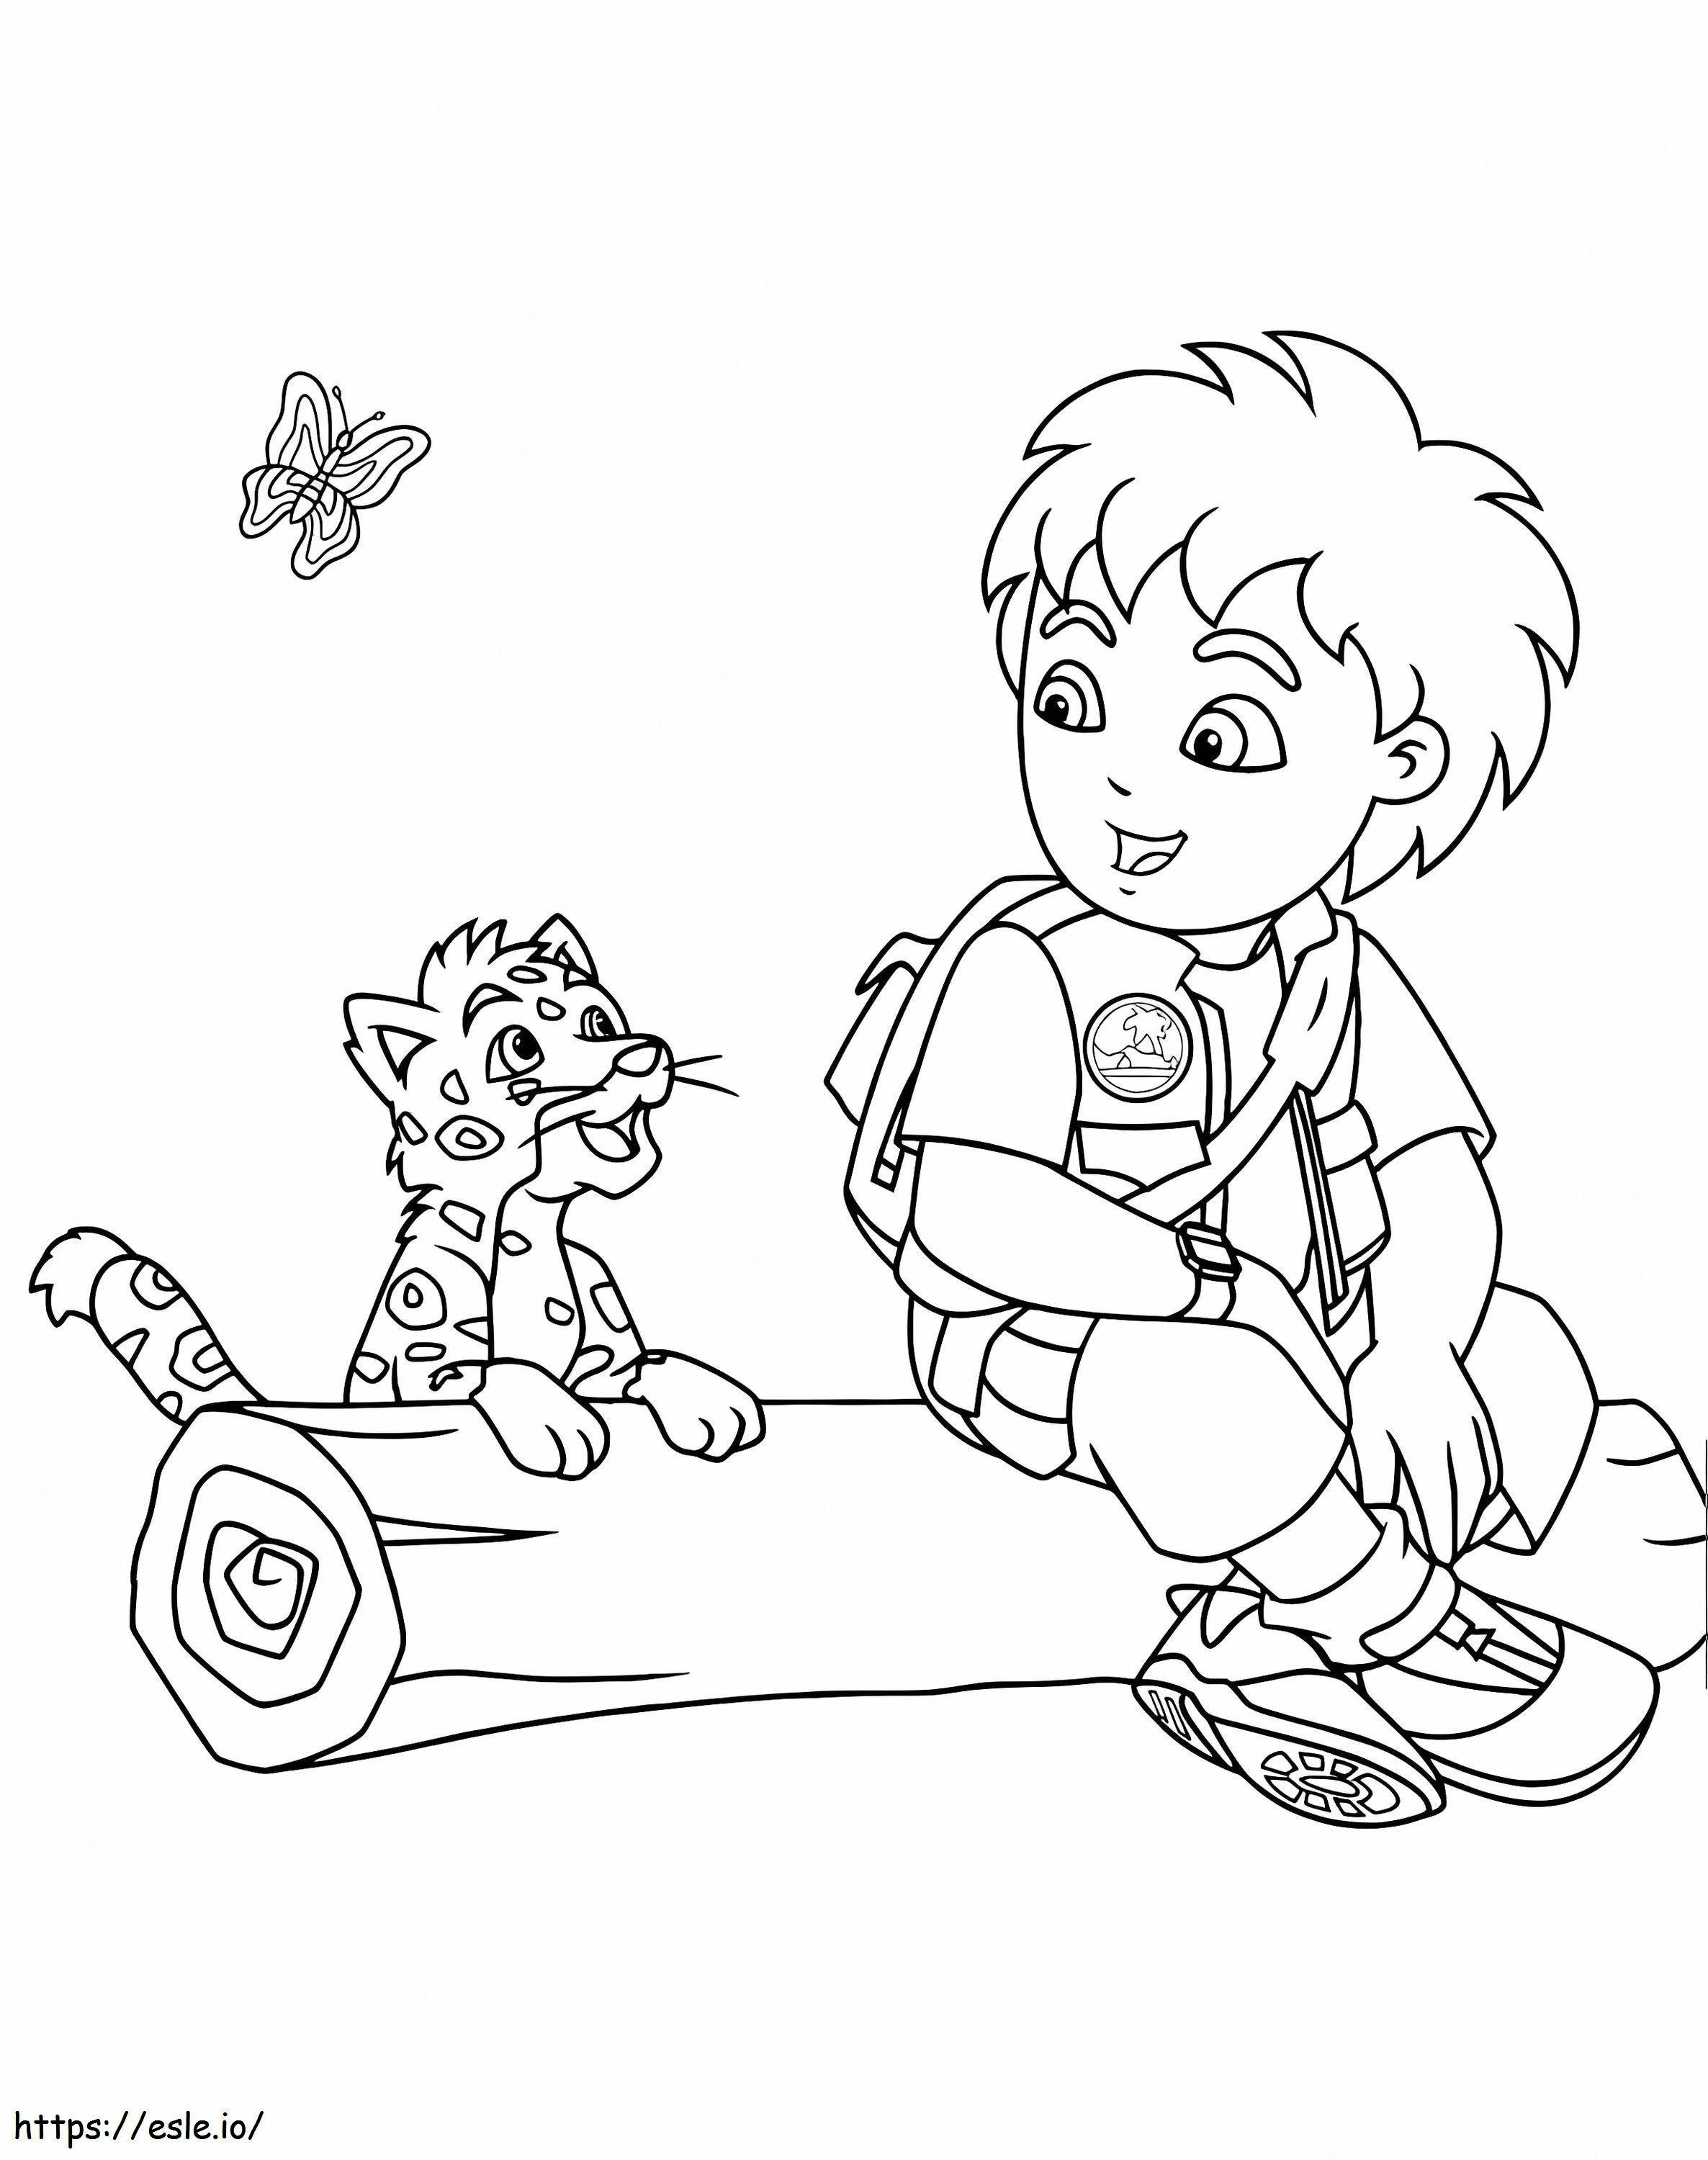 Diego And The Baby Cheetah coloring page